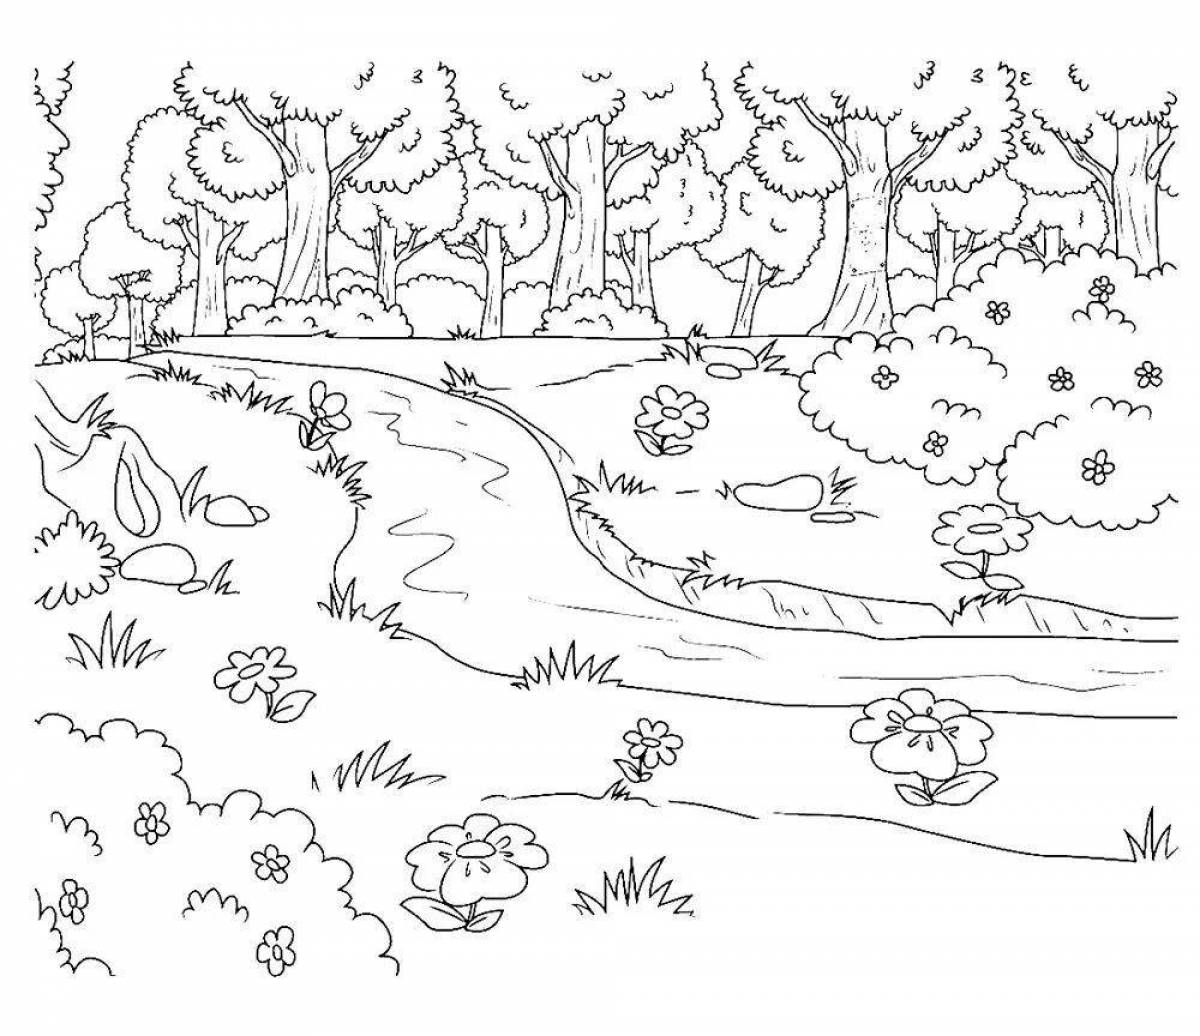 Rampant cleaning coloring page